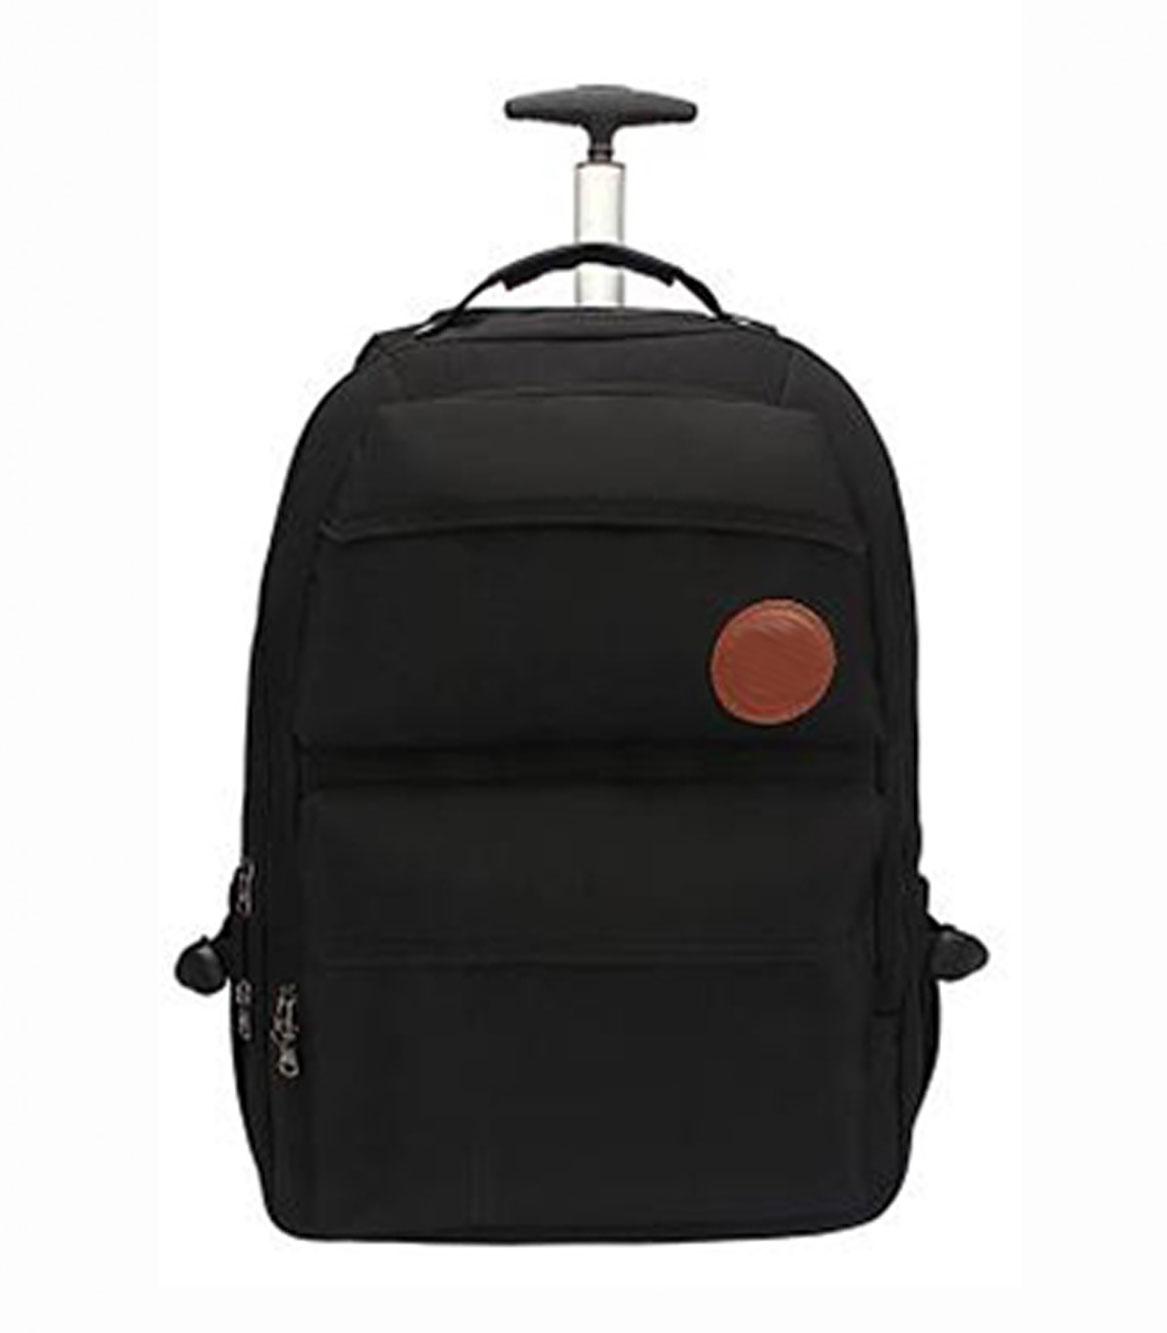 COLOSSUS LAPTOP TROLLEY BACKPACK